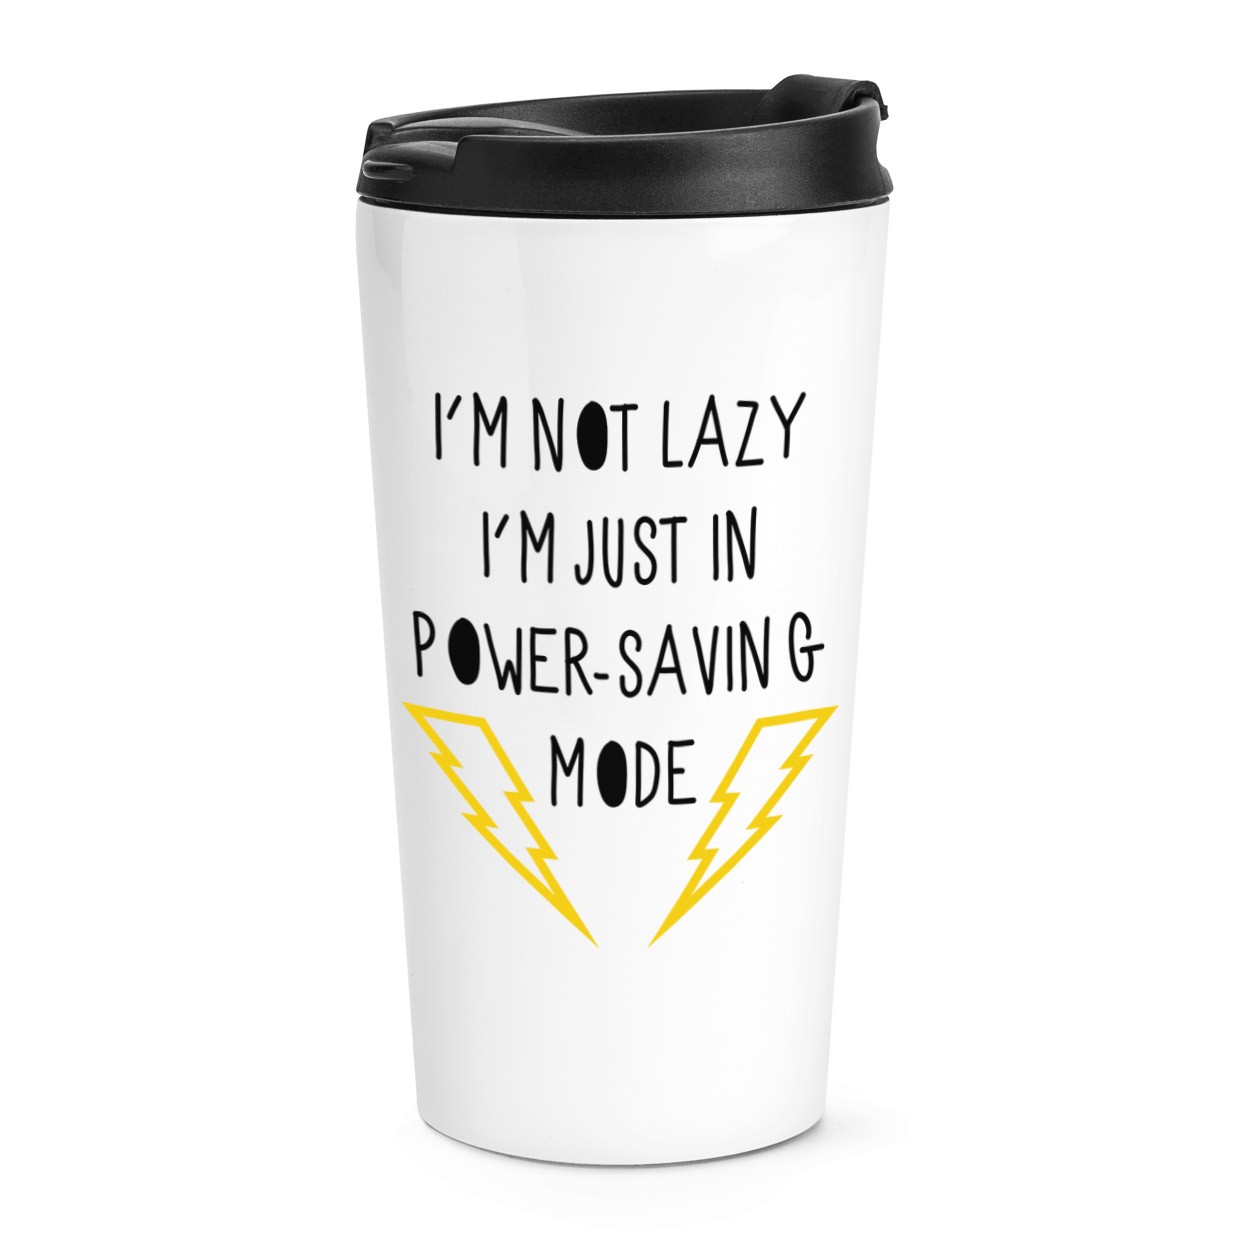 I'm Not Lazy I'm Just In Power Saving Mode Travel Mug Cup